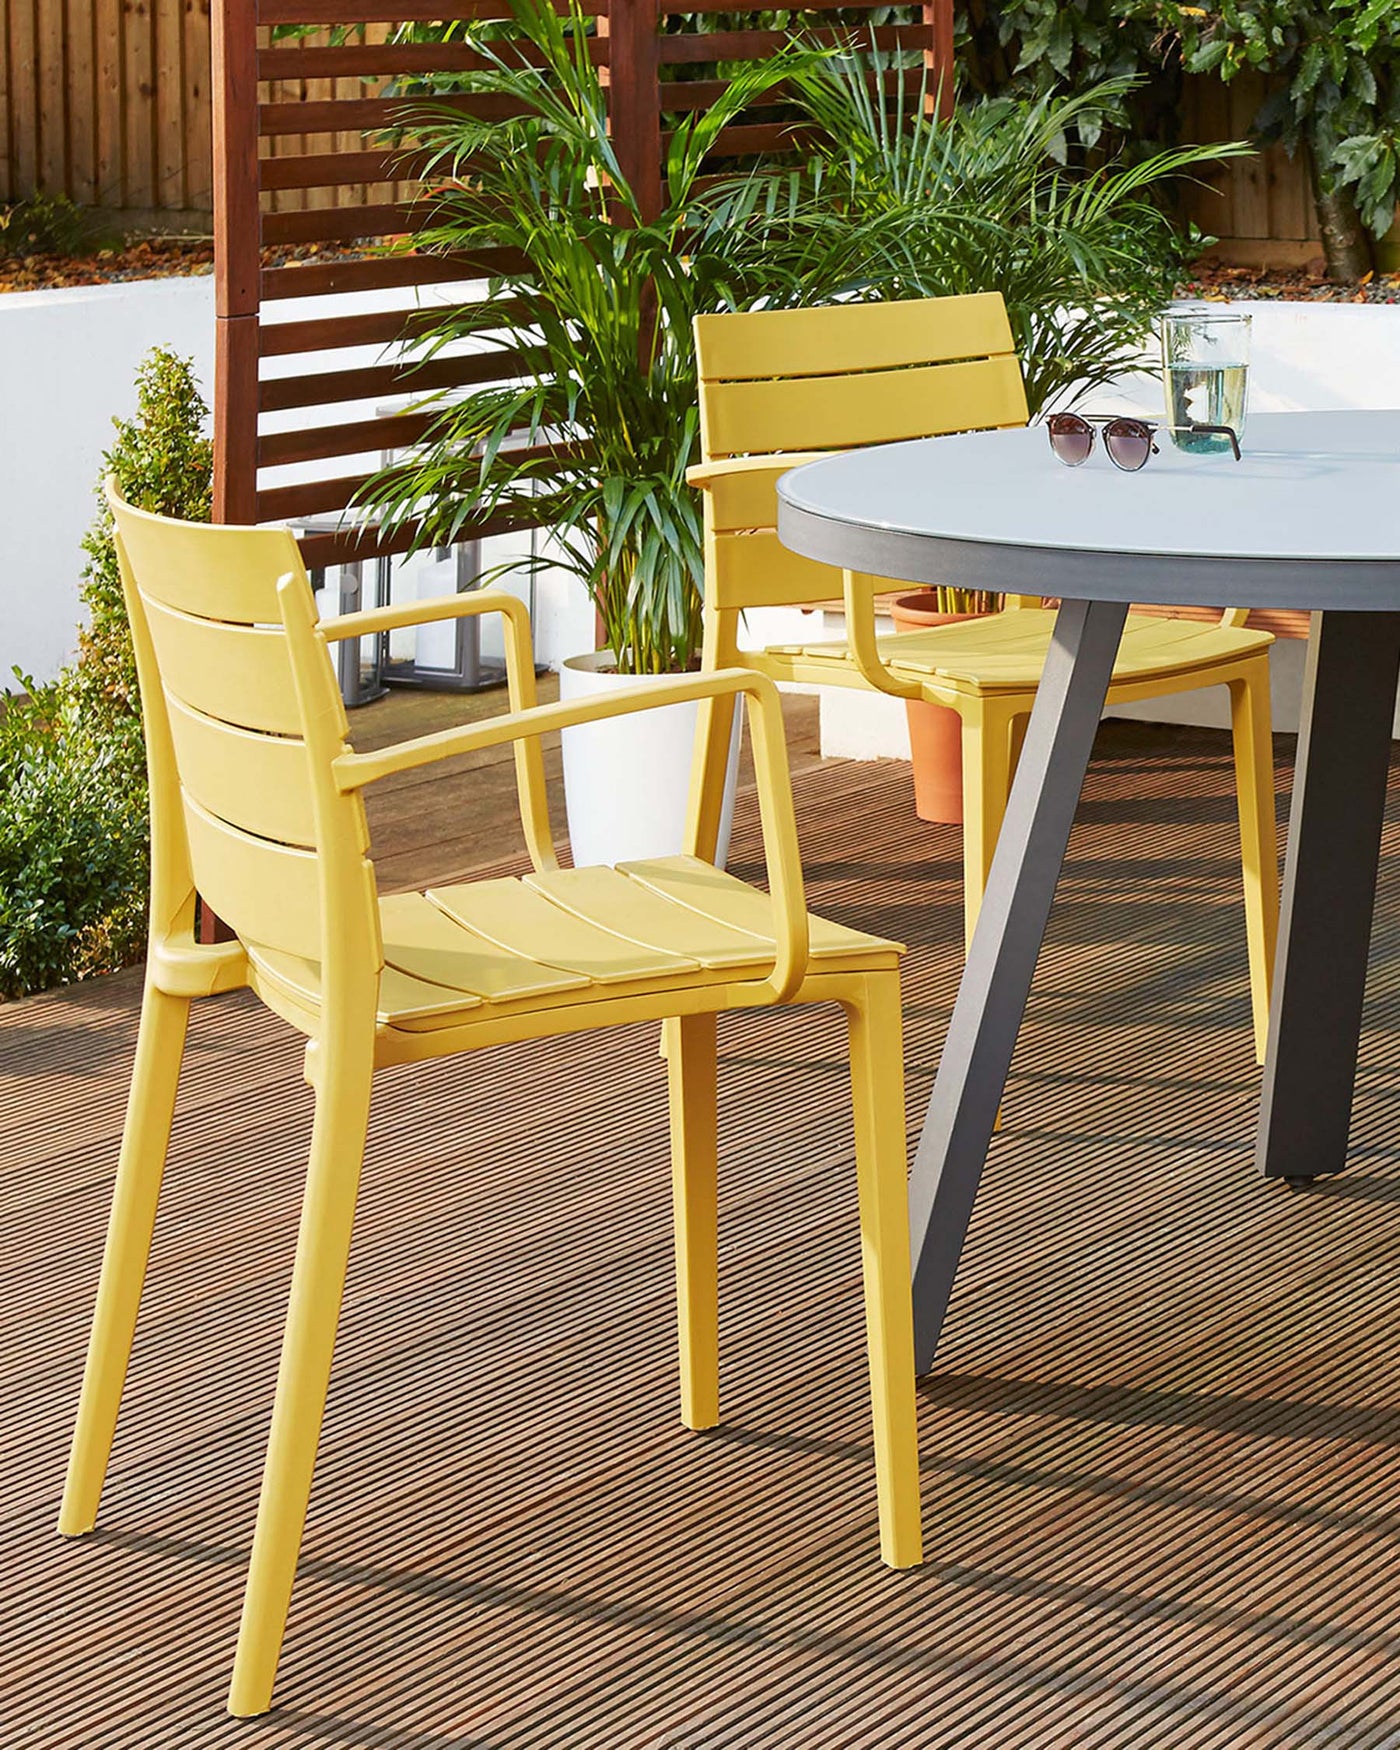 Modern outdoor furniture set featuring a sleek round table with a white top and grey tapered legs, accompanied by vibrant yellow armchairs with horizontal slat backing on a wooden deck.